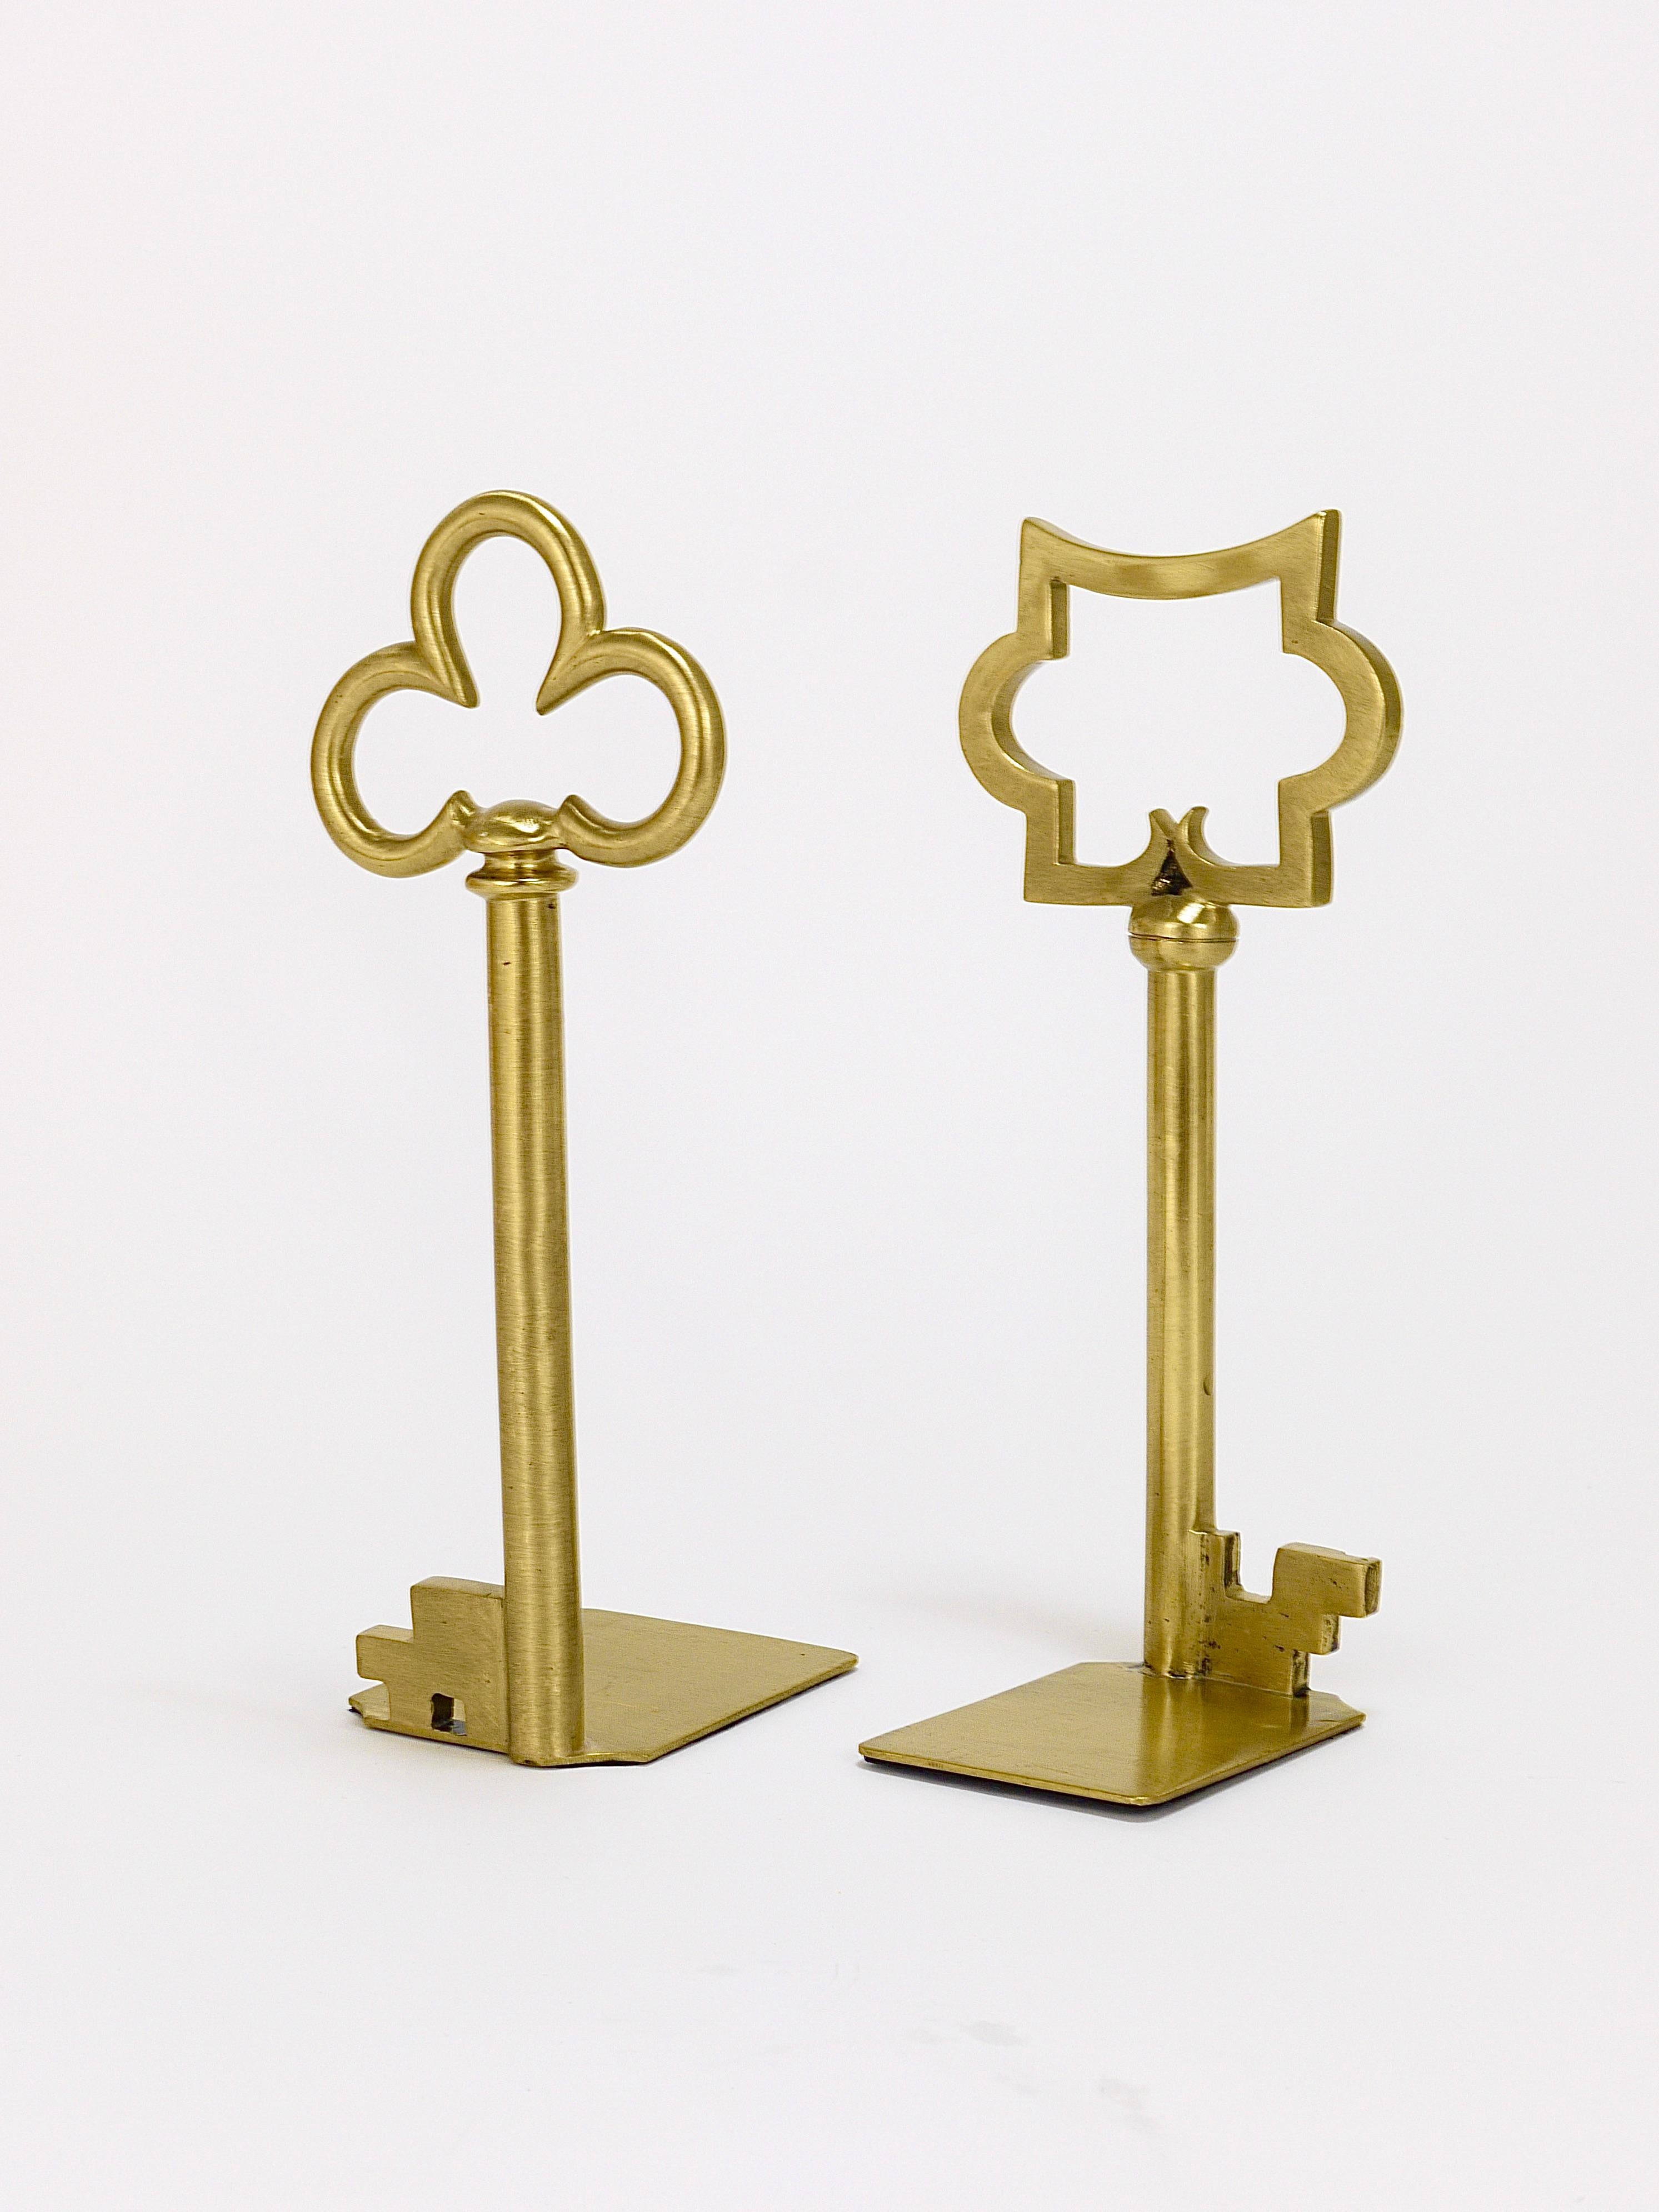 Sculptural Austrian Midcentury Brass Key Book Ends from the, 1950s For Sale 2